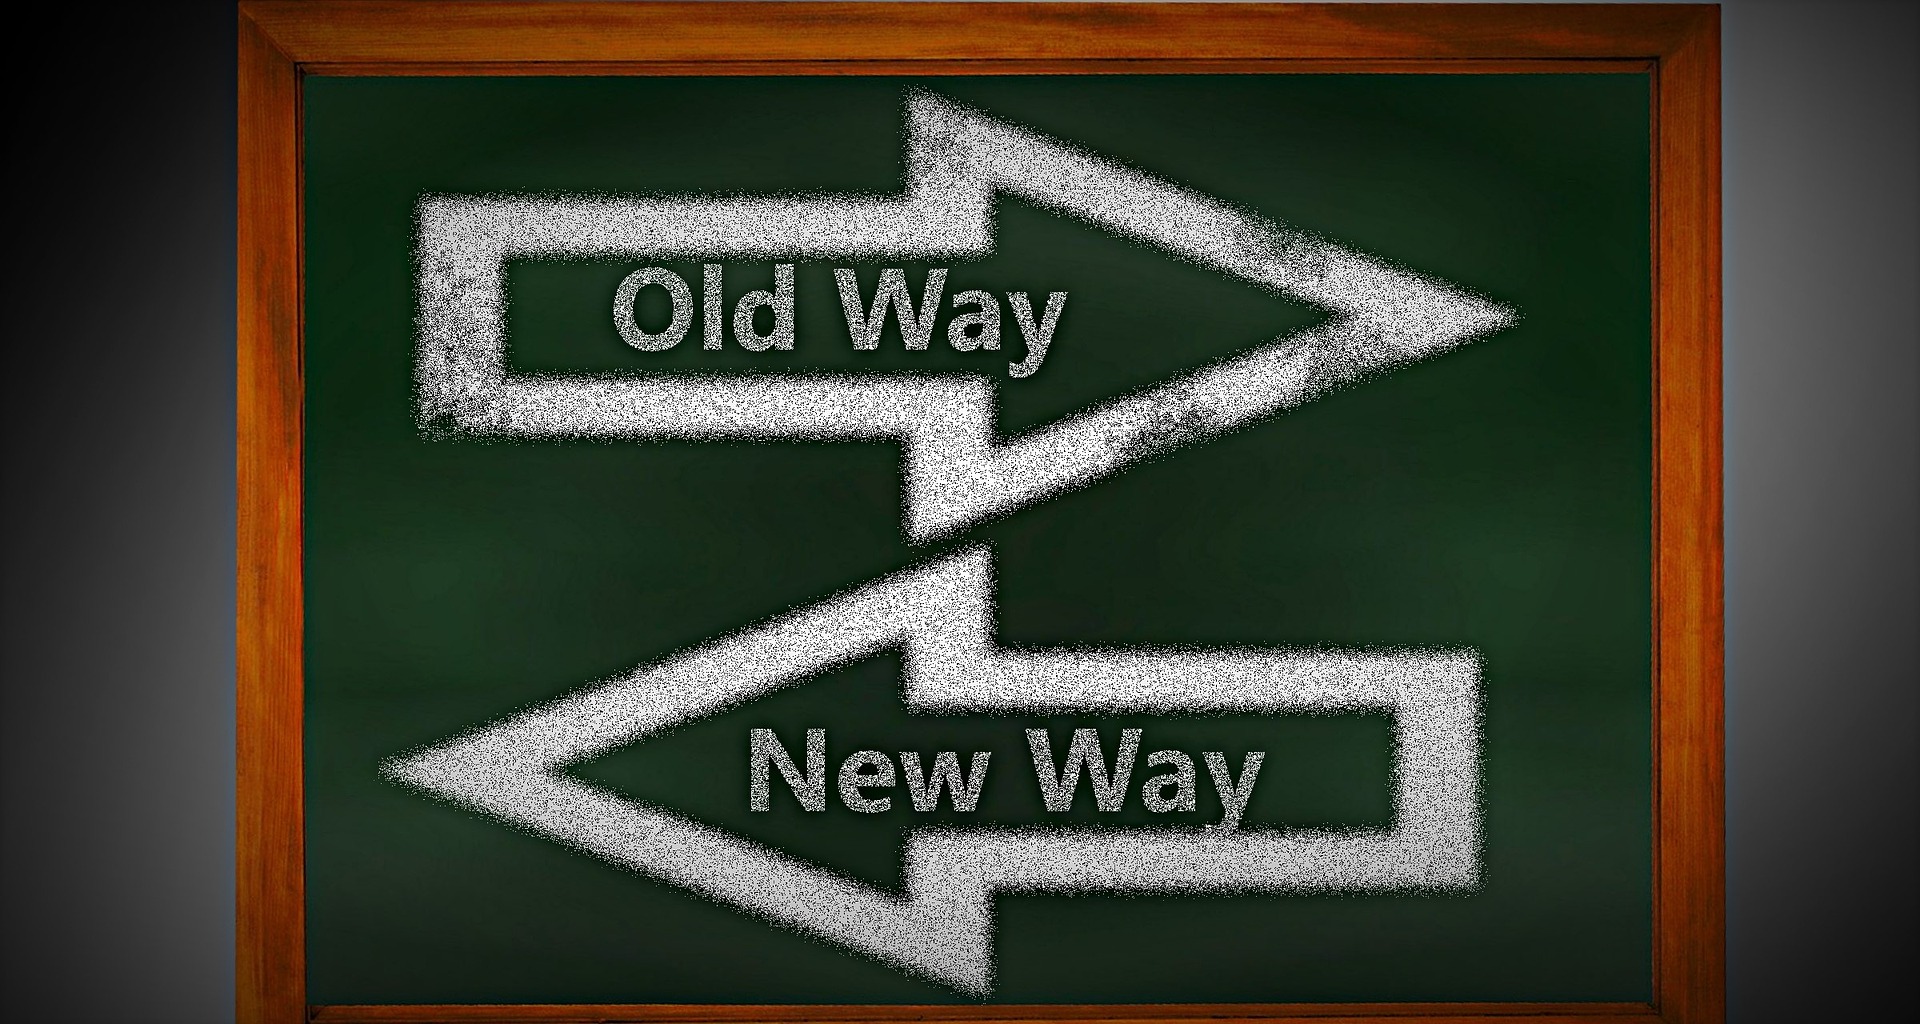 Change-from-old-way-to-new-way-kathrynleroy.com